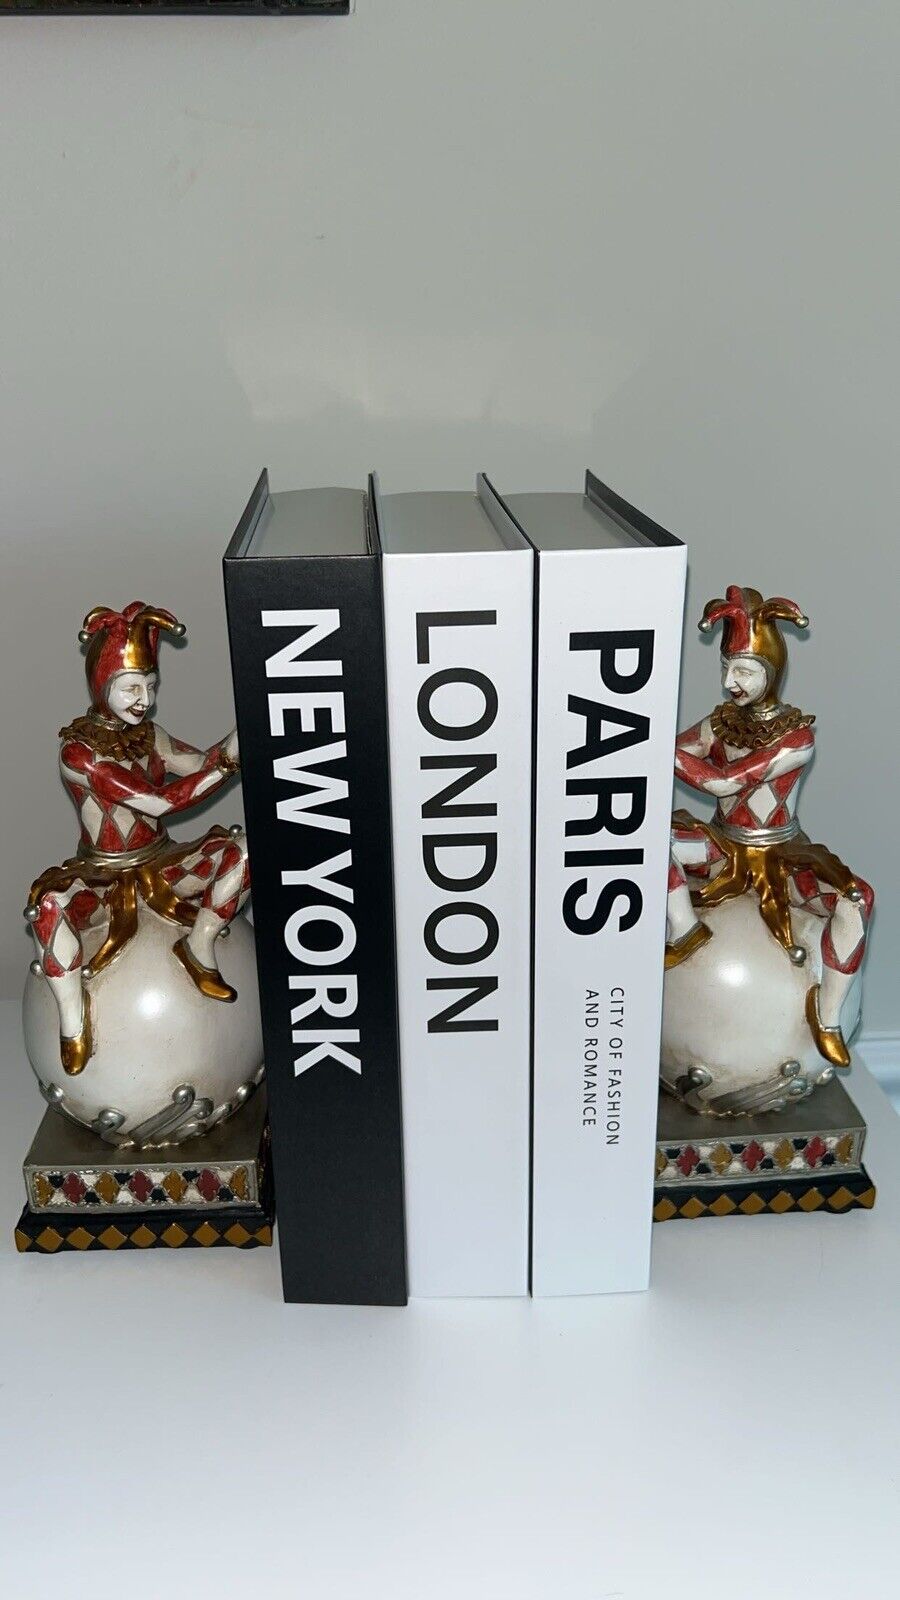 HAND PAINTED BOOKENDS w JESTER, HARLEQUIN ON BALL, MILSON & LOUIS, 9.5 INCHES